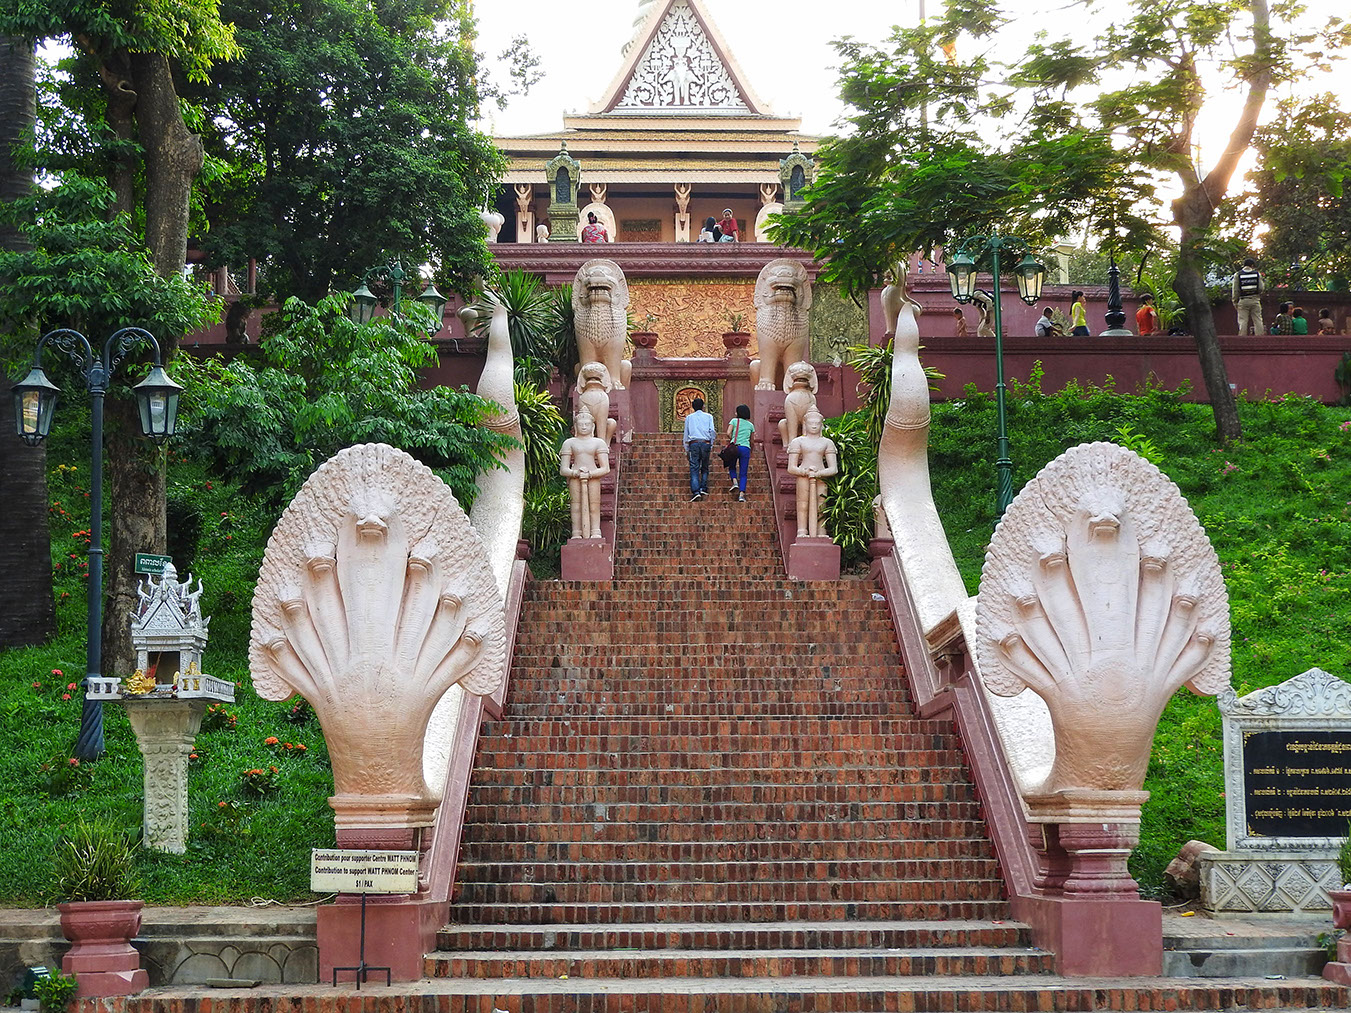 The entrance of Wat Phnom has a stairway with a Lion and Serpent motif, similar to that of Siem Reap.